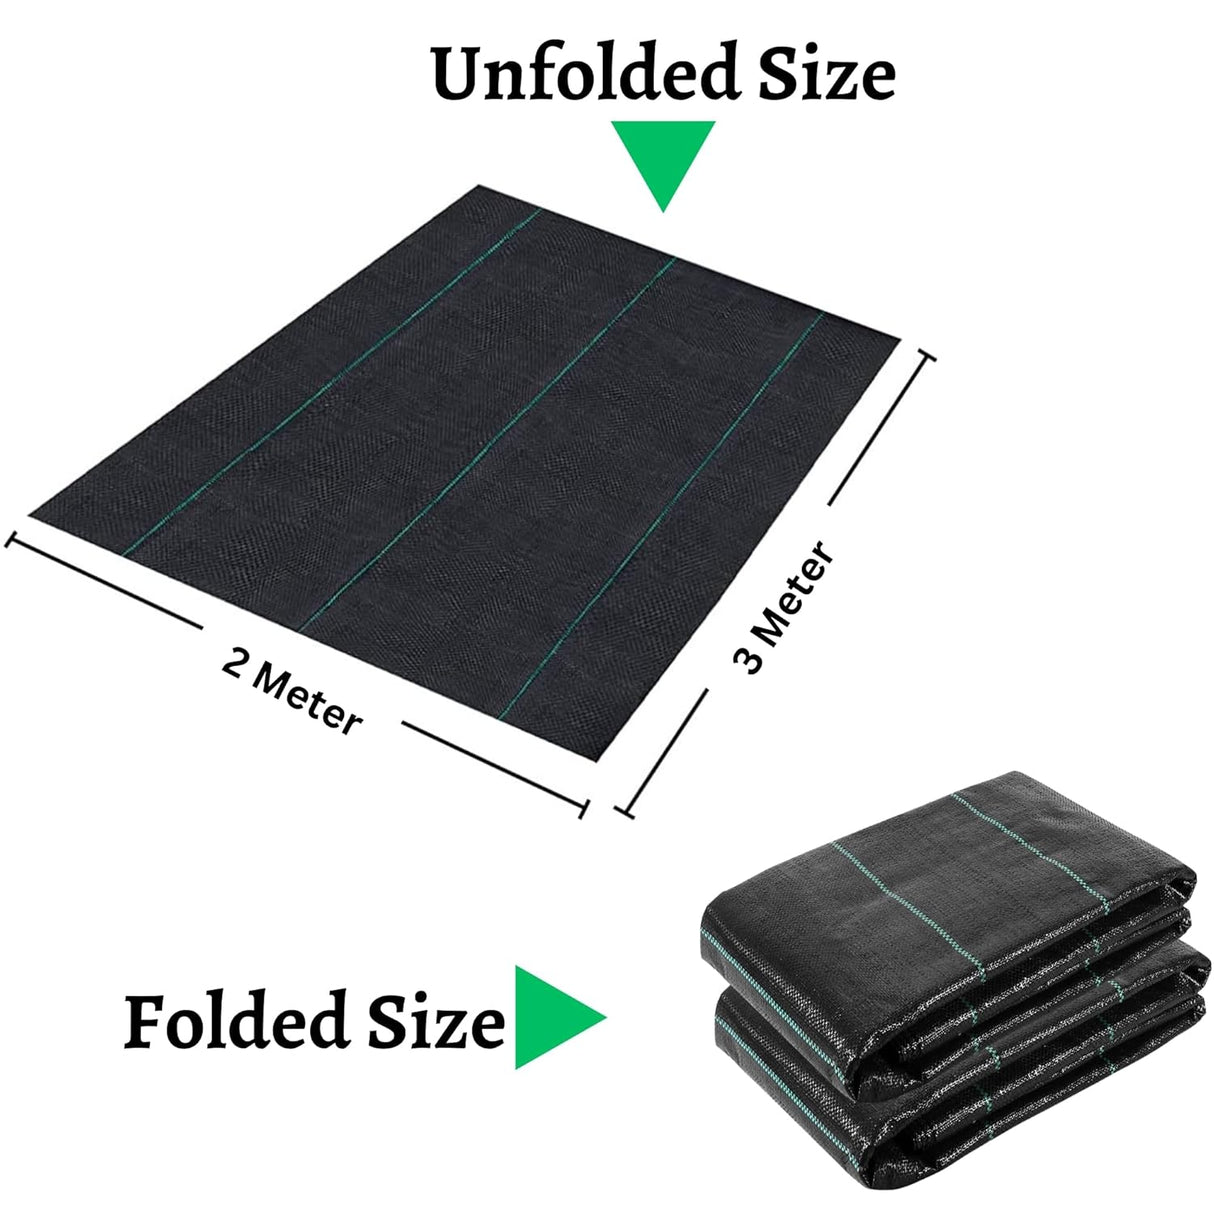 Singhal Premium Garden Weed Control Barrier Sheet Mat 2 Meter x 3 Meter, Landscape Fabric 110 GSM Heavy Duty Weed Block Gardening Mat for Gardens, Agriculture, Outdoor Projects (Black)